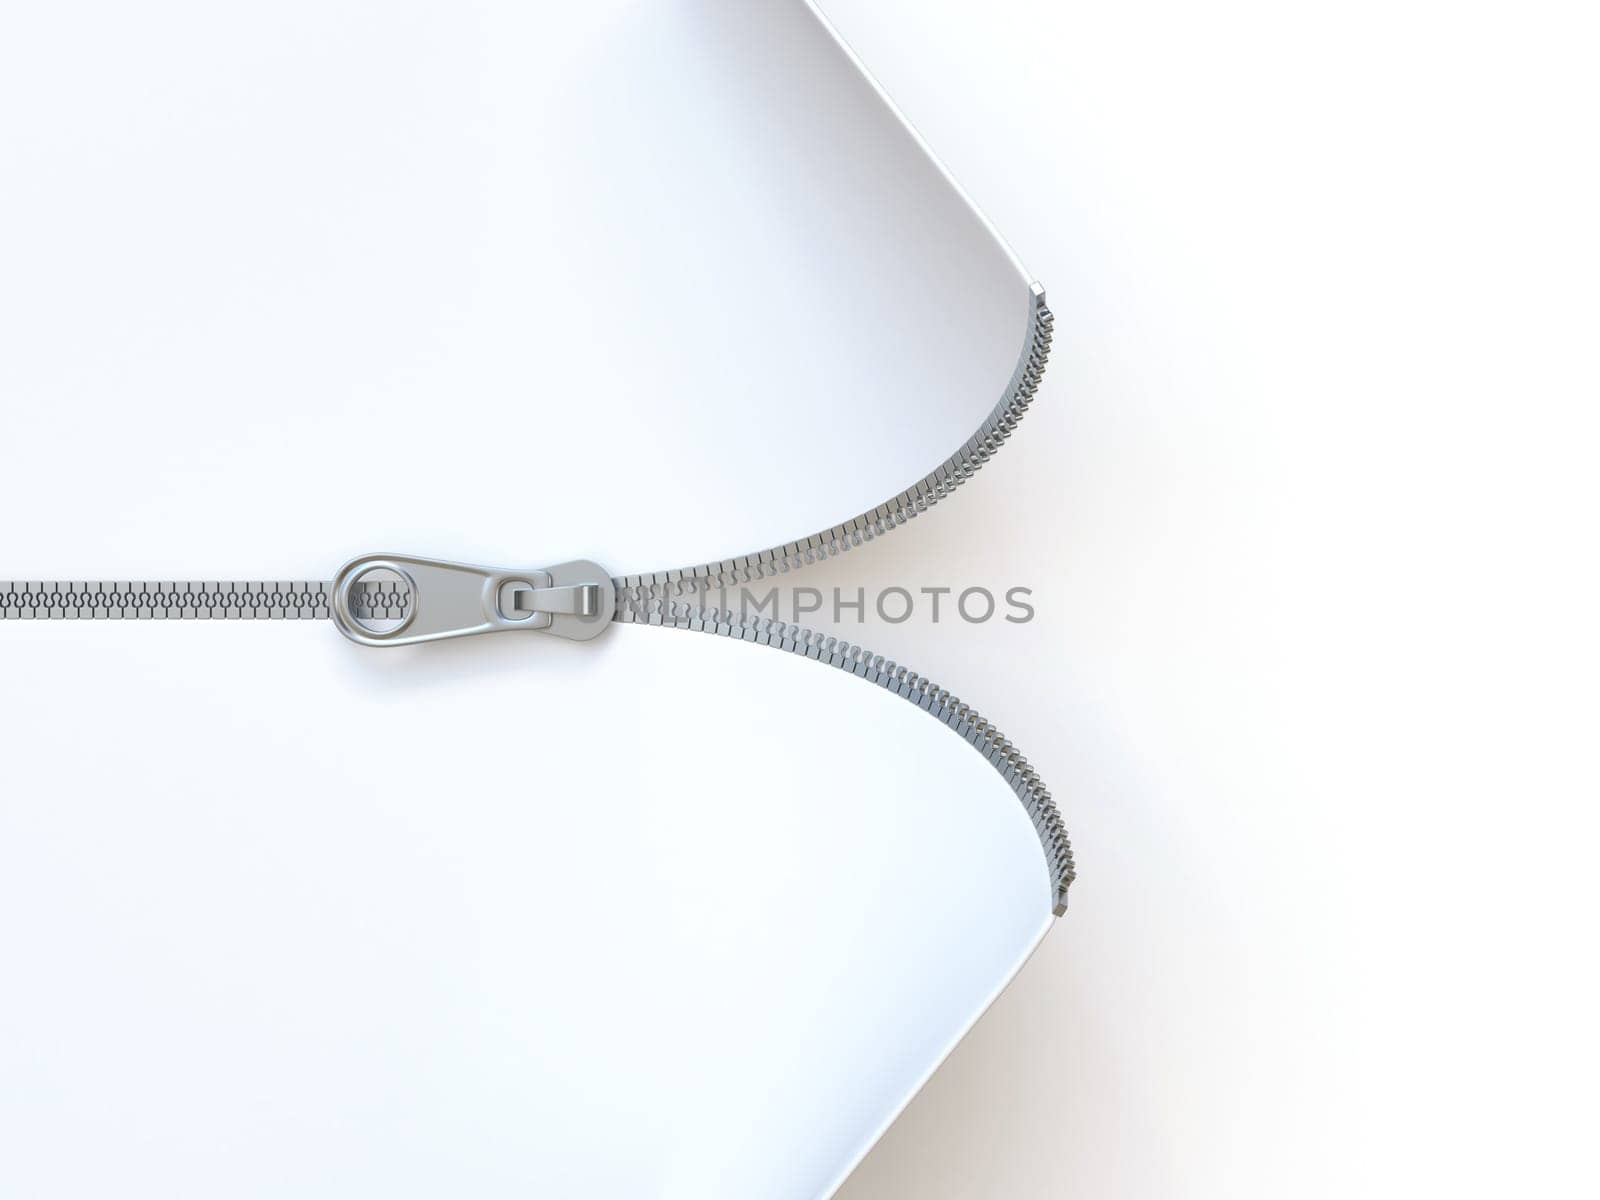 Horizontal zipper two side opened 3D rendering illustration isolated on white background